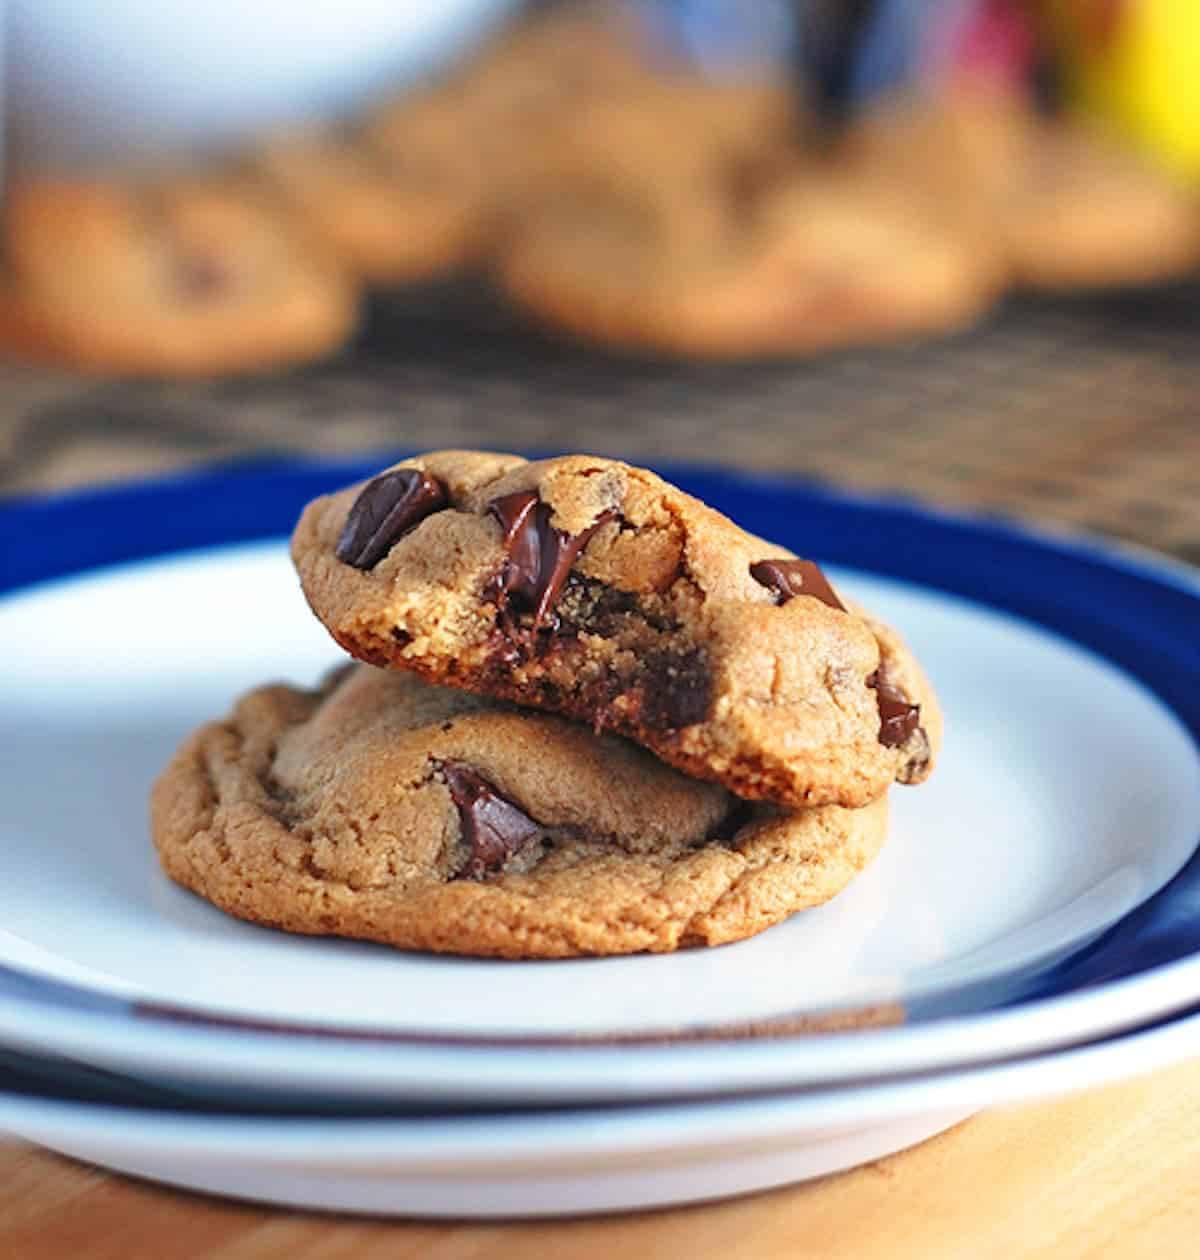 Two malted double chocolate chip cookies on a plate with a bite taken out of one.